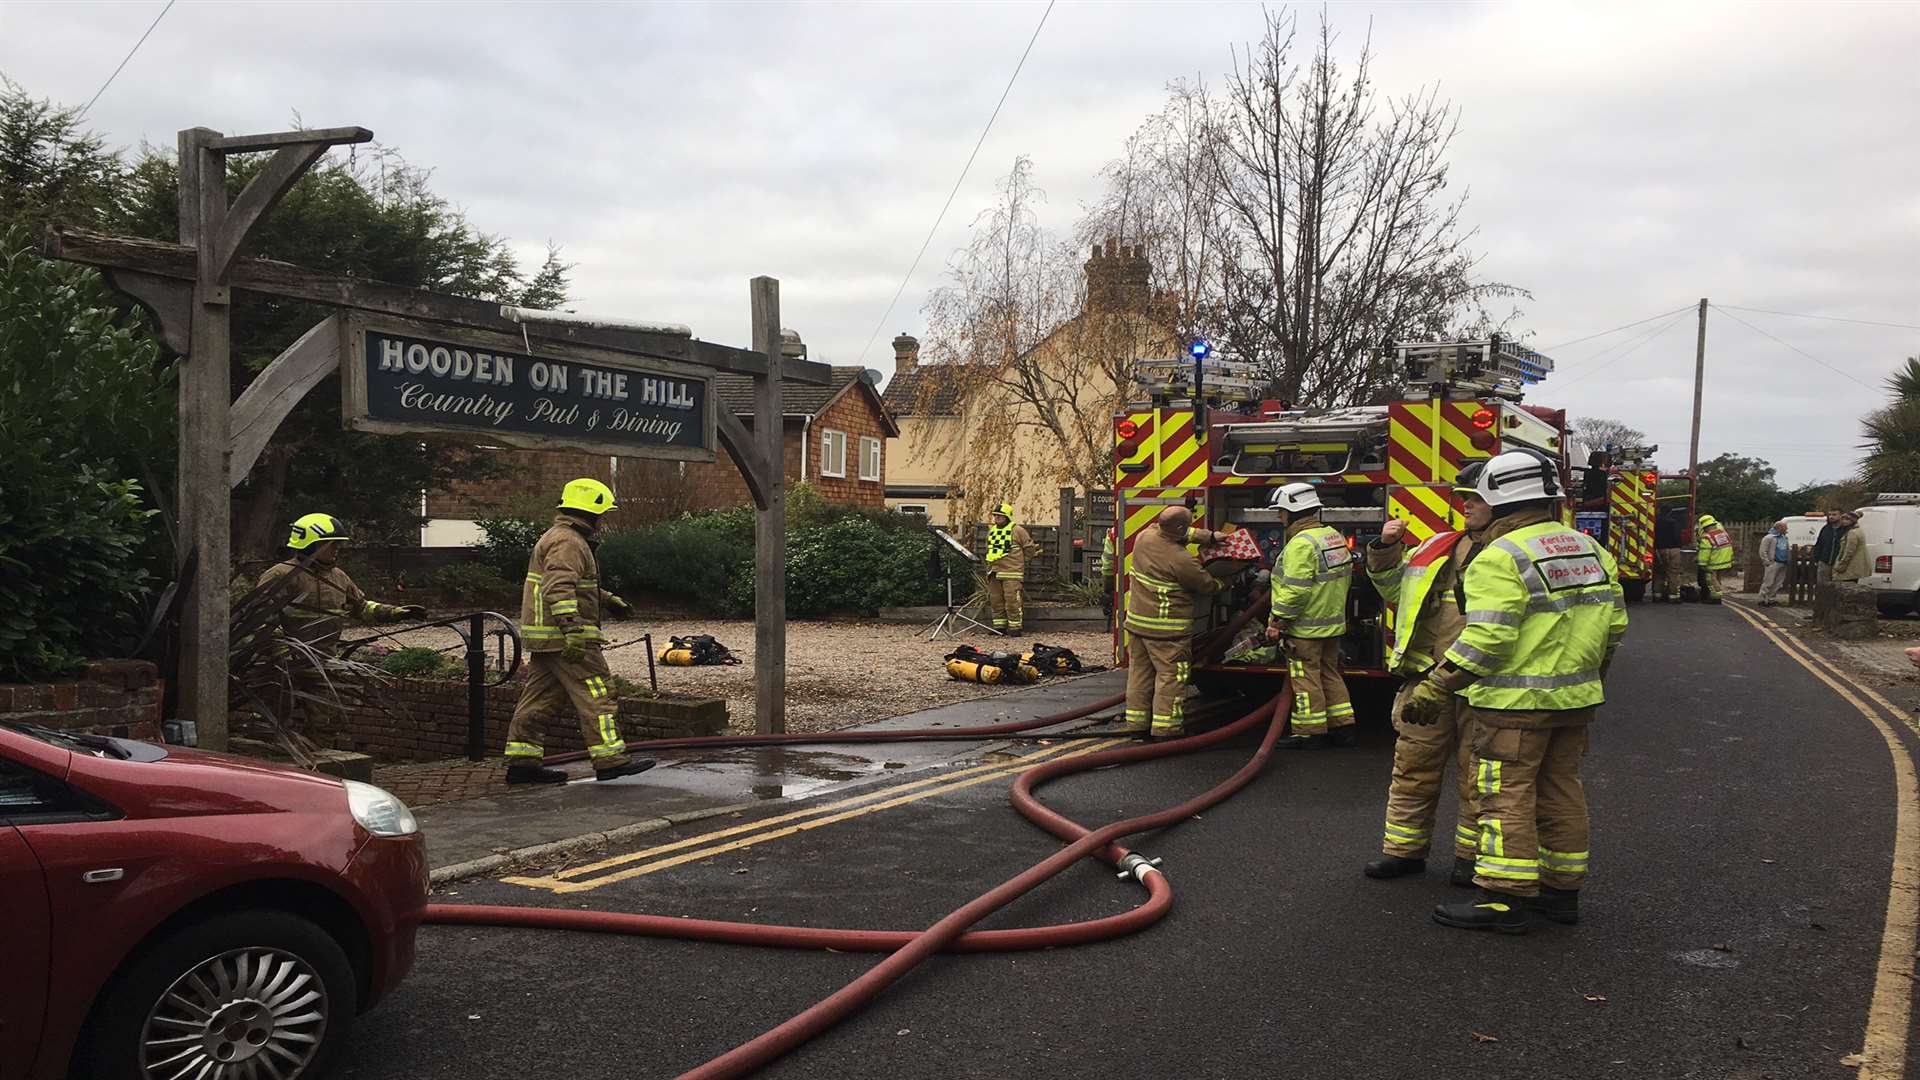 Firefighters battling the blaze at the Hooden on the Hill in Willesborough yesterday